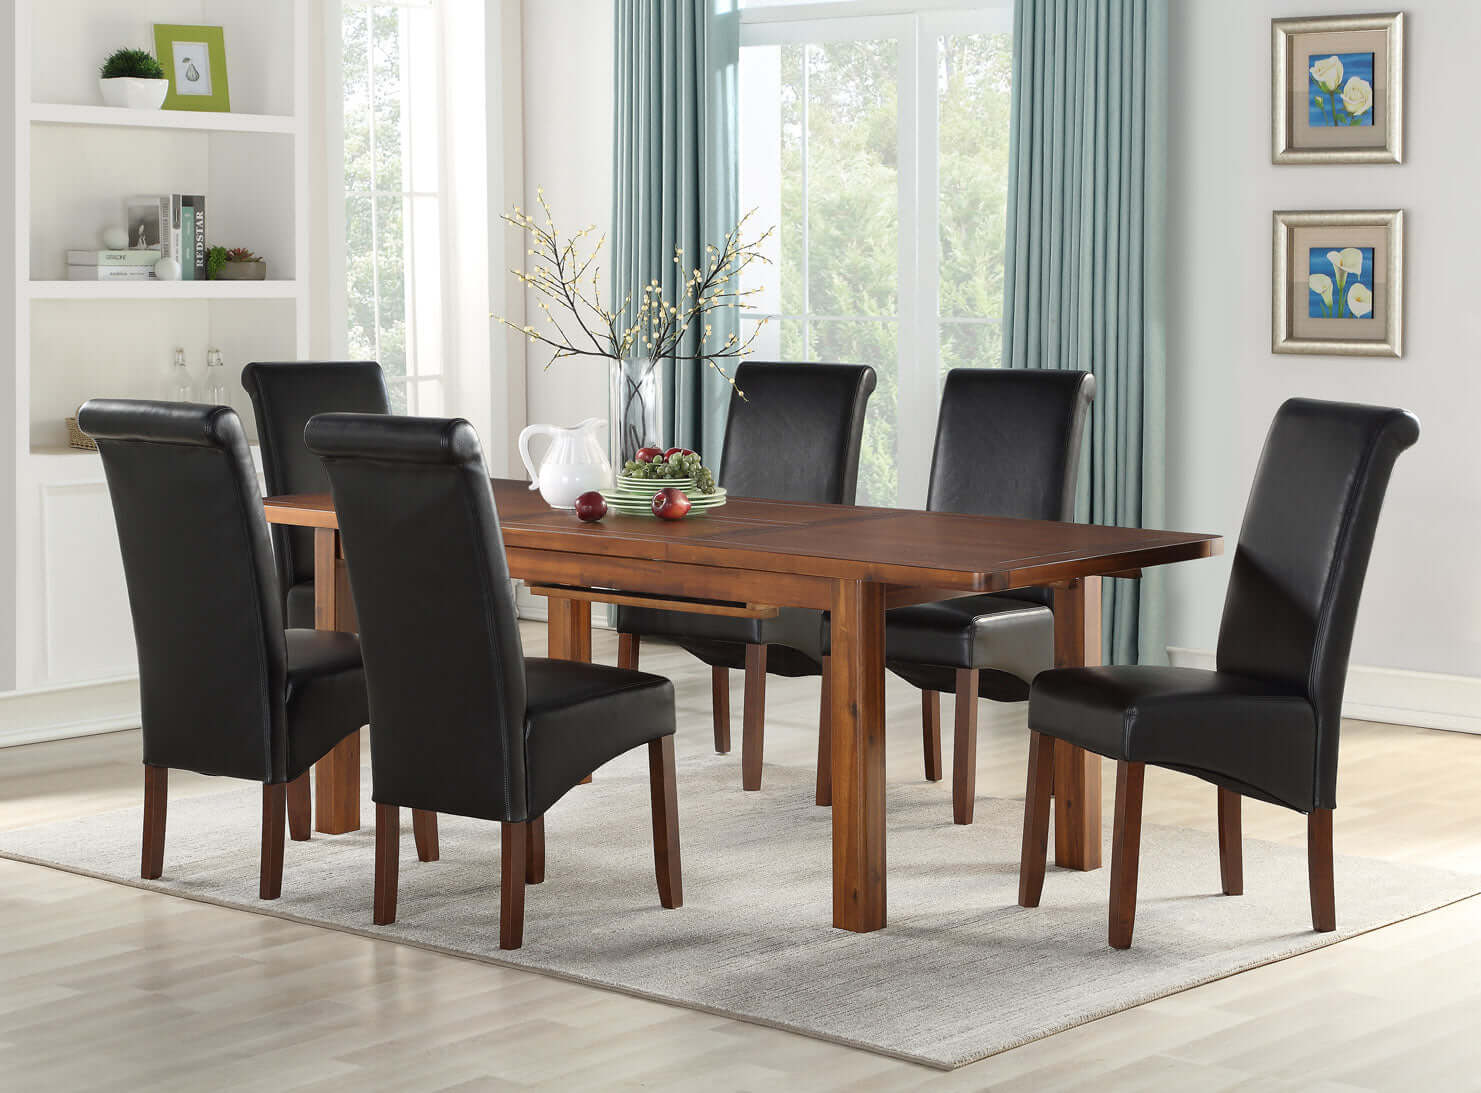 Andorra Acacia 165cm Dining Set - 6 Black Sophie Dining ChairsAndorra Acacia 165cm Dining Set - 6 Black Sophie Dining Chairs